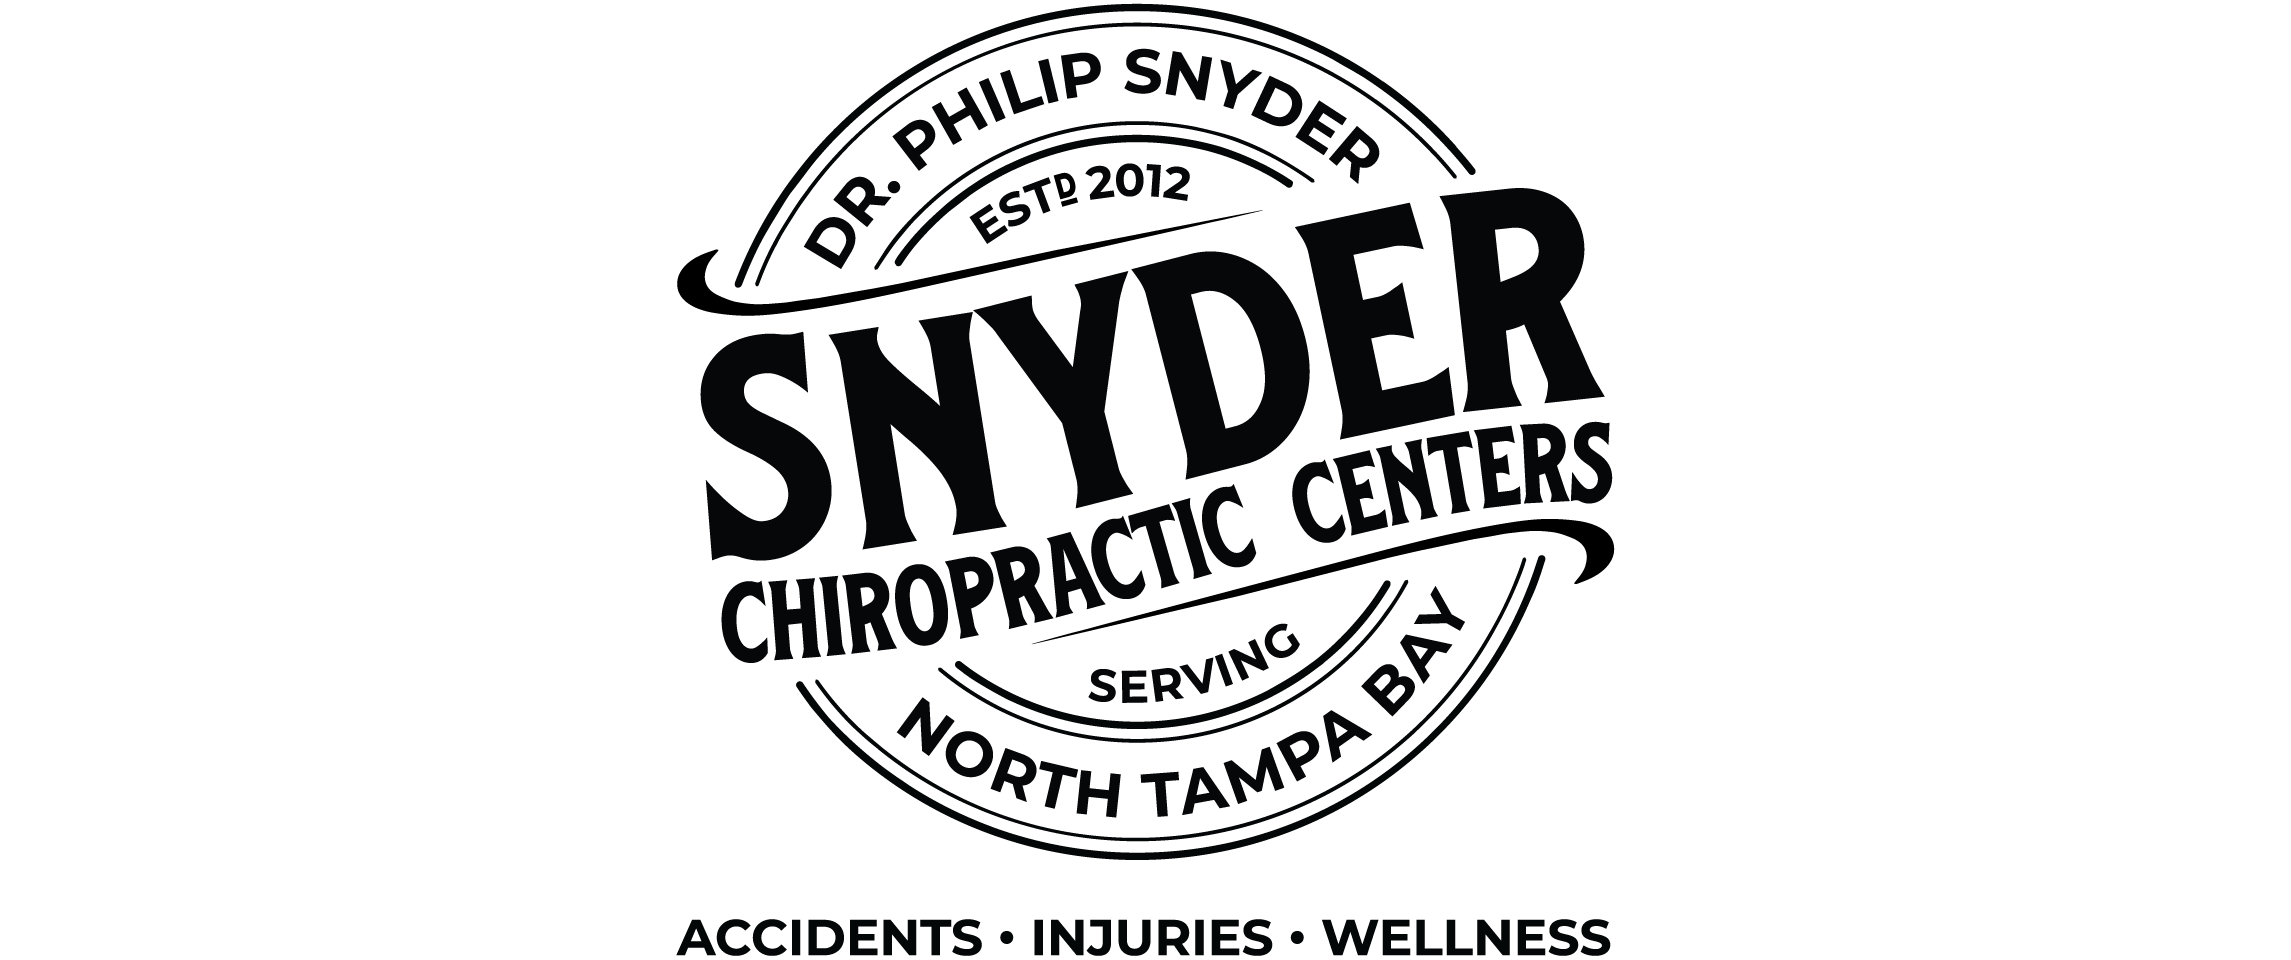 Snyder Chiropractic Centers